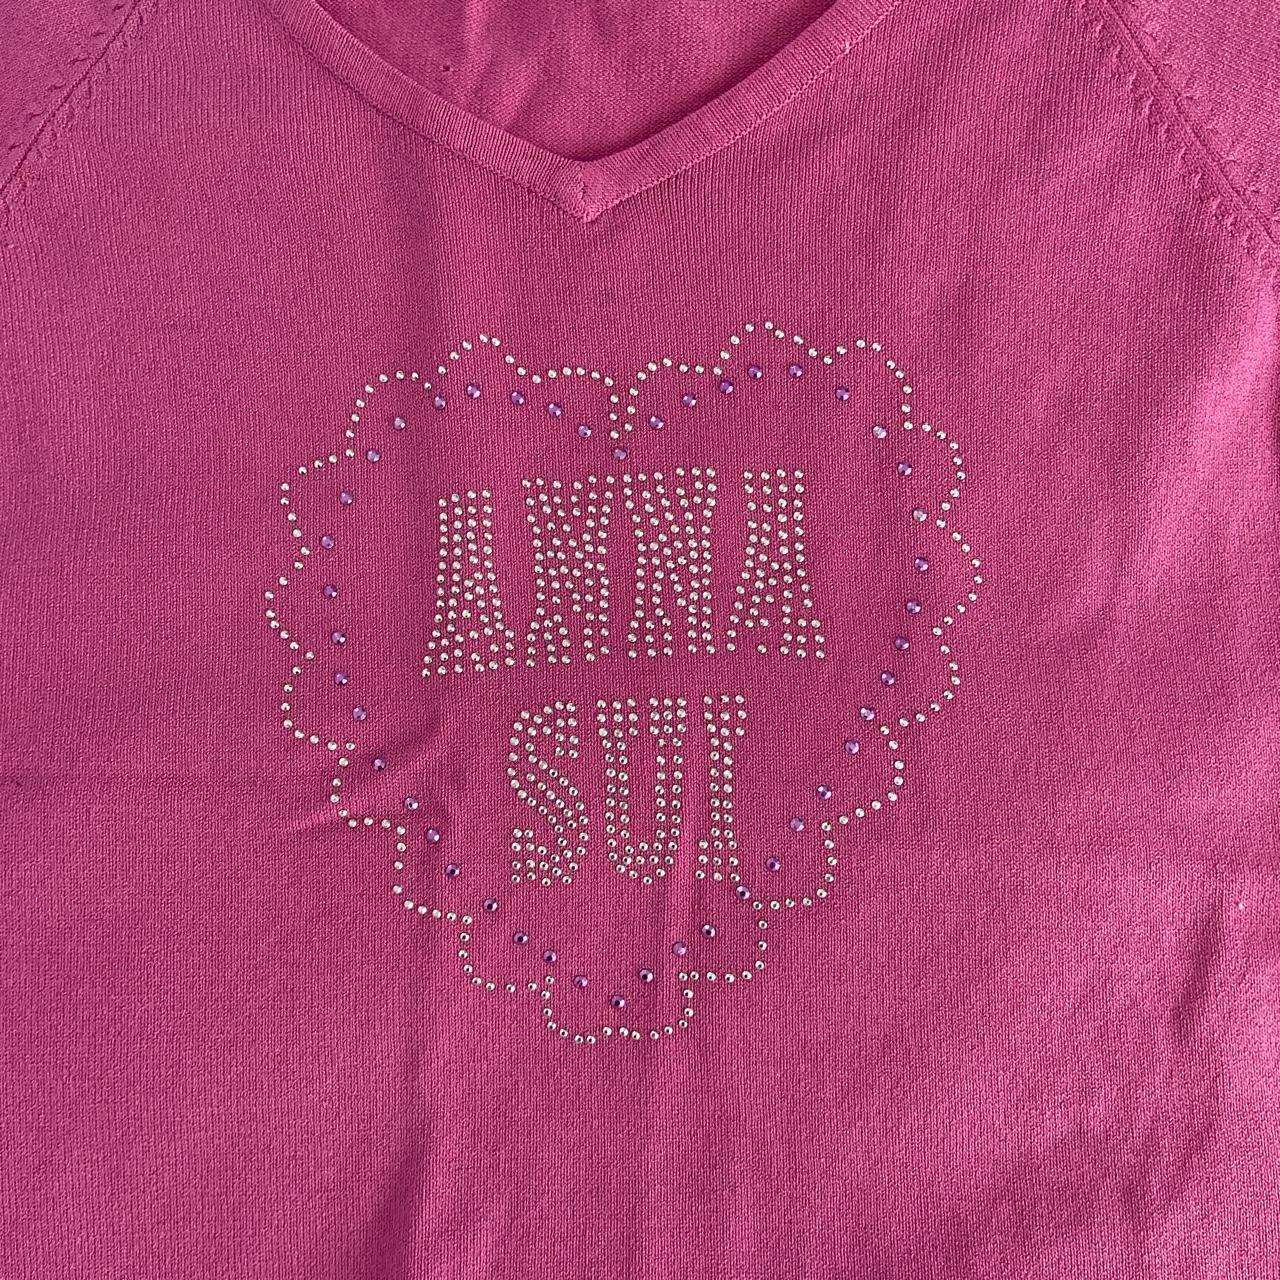 Supa cute Anna Sui pink top. not too sure if this is... - Depop